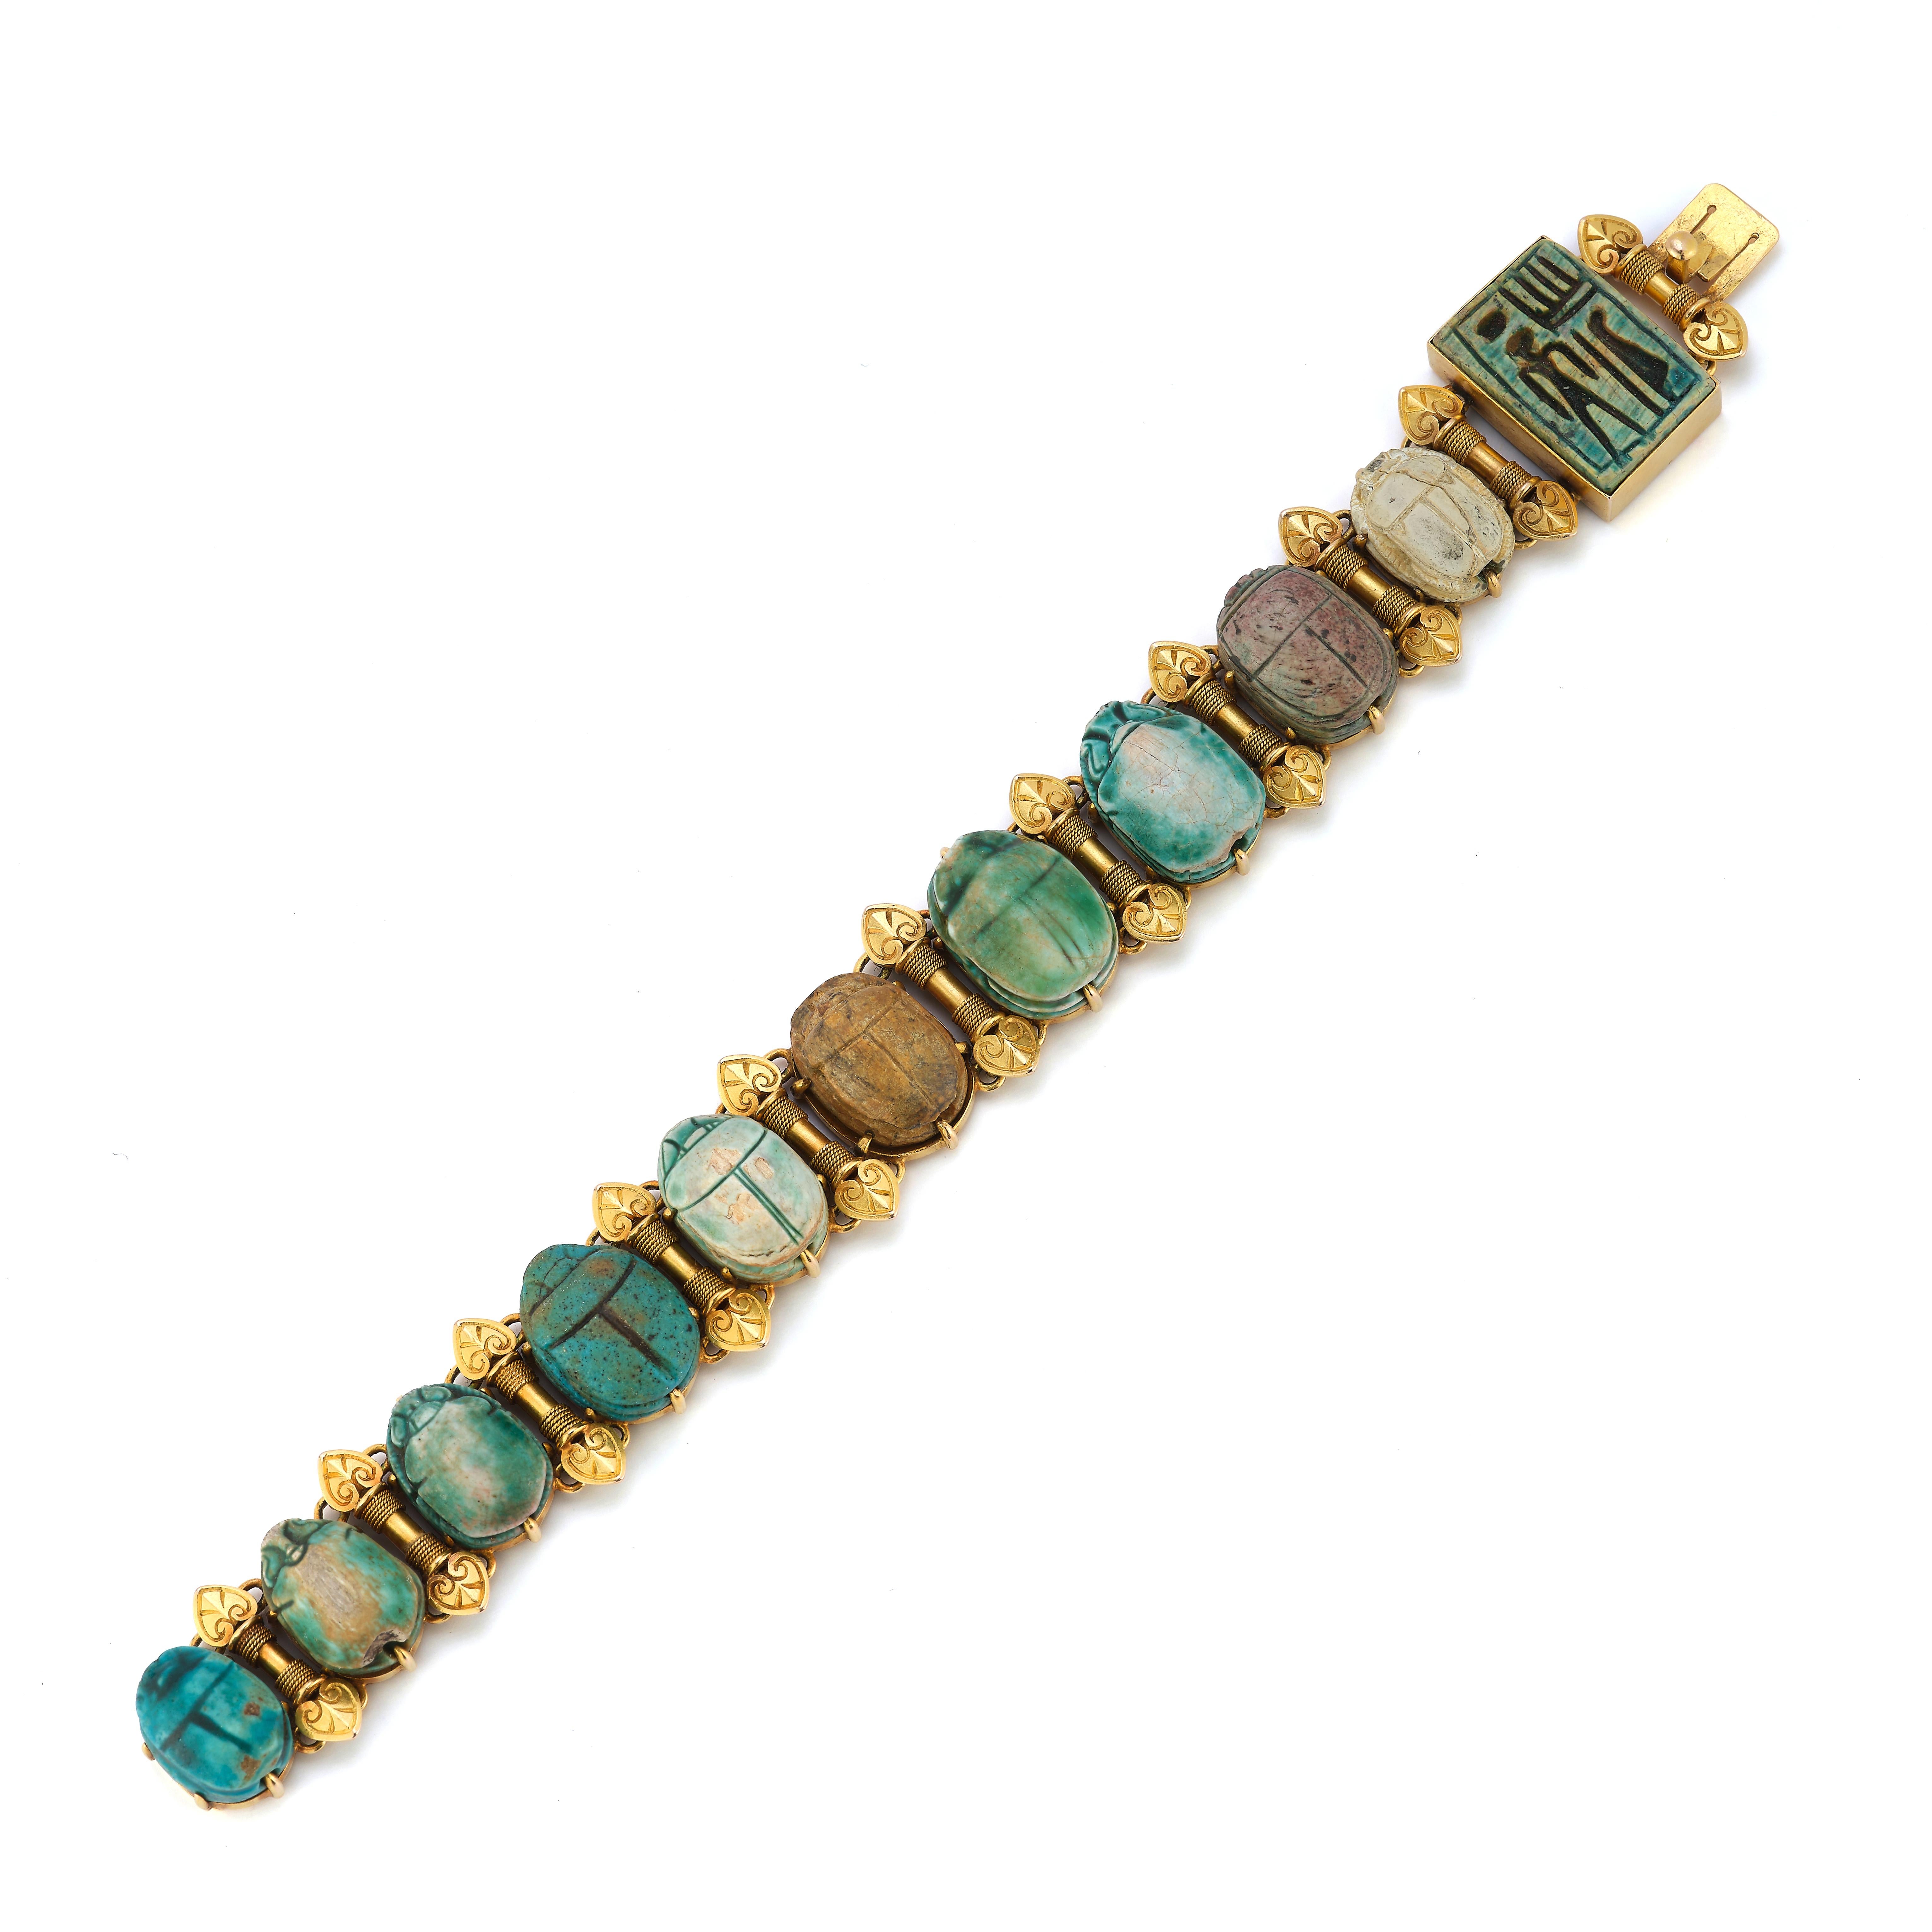 Egyptian Revival Faience Scarab Bracelet

11 links of multi color carved Egyptian faience scarabs set in gold

Measurements: 6.5